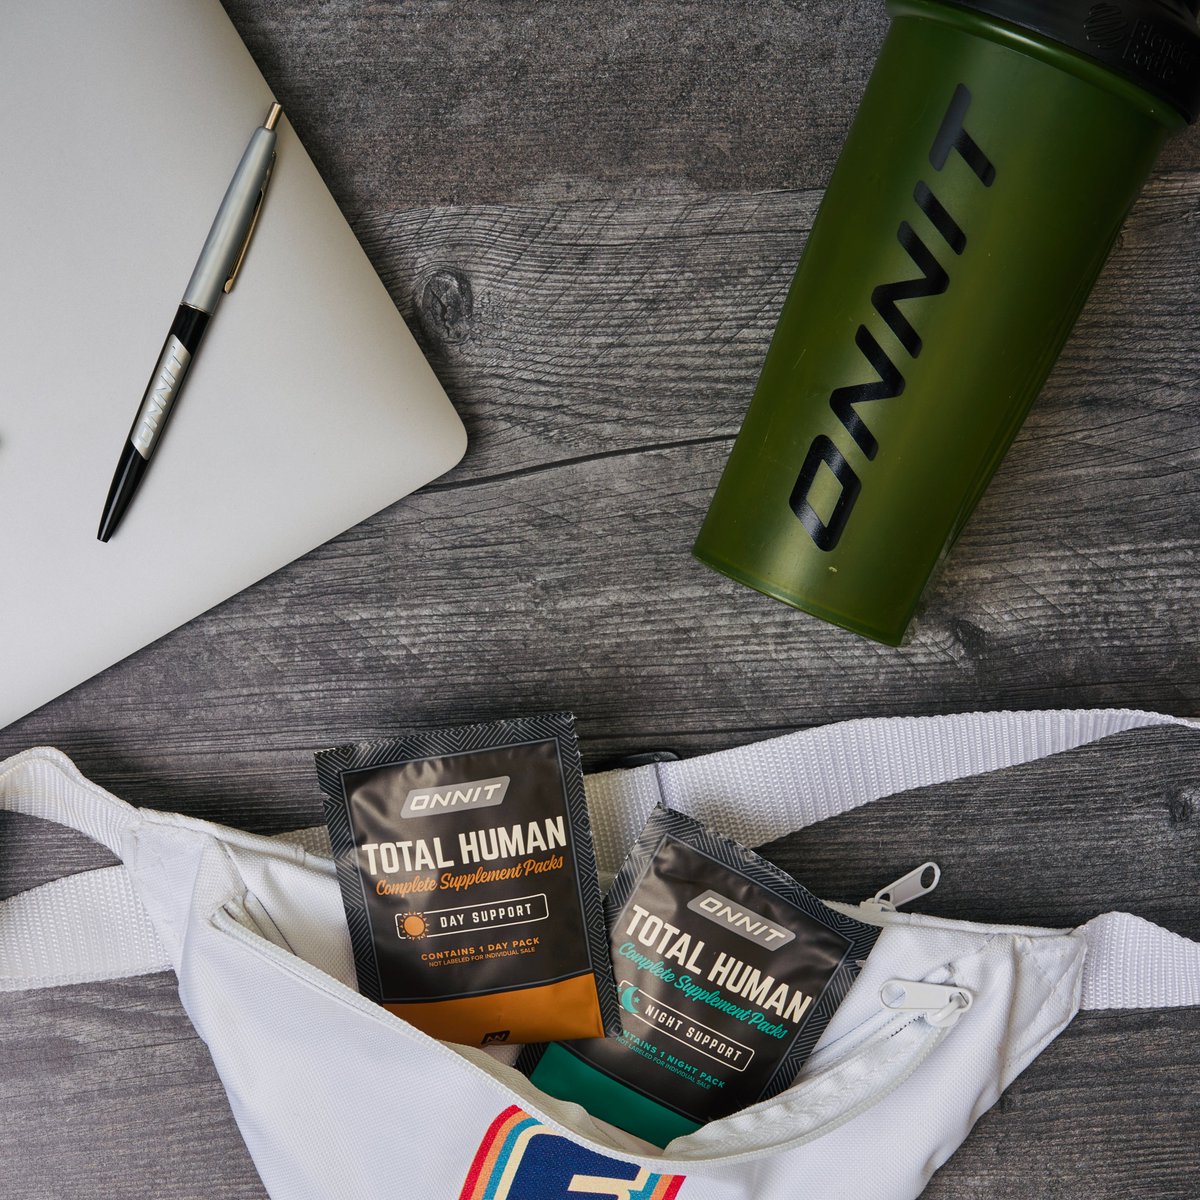 ⚡️AMAZON FLASH SALE⚡️ Prime Members get our 30 day supply of Total Human® for 25% off! This is just about the best deal you’ll find on Total Human®, but it won’t last long. This deal ends at midnight, head to Amazon to shop! amzn.to/3lHU0zi - #onnit #getonnit #allyou…